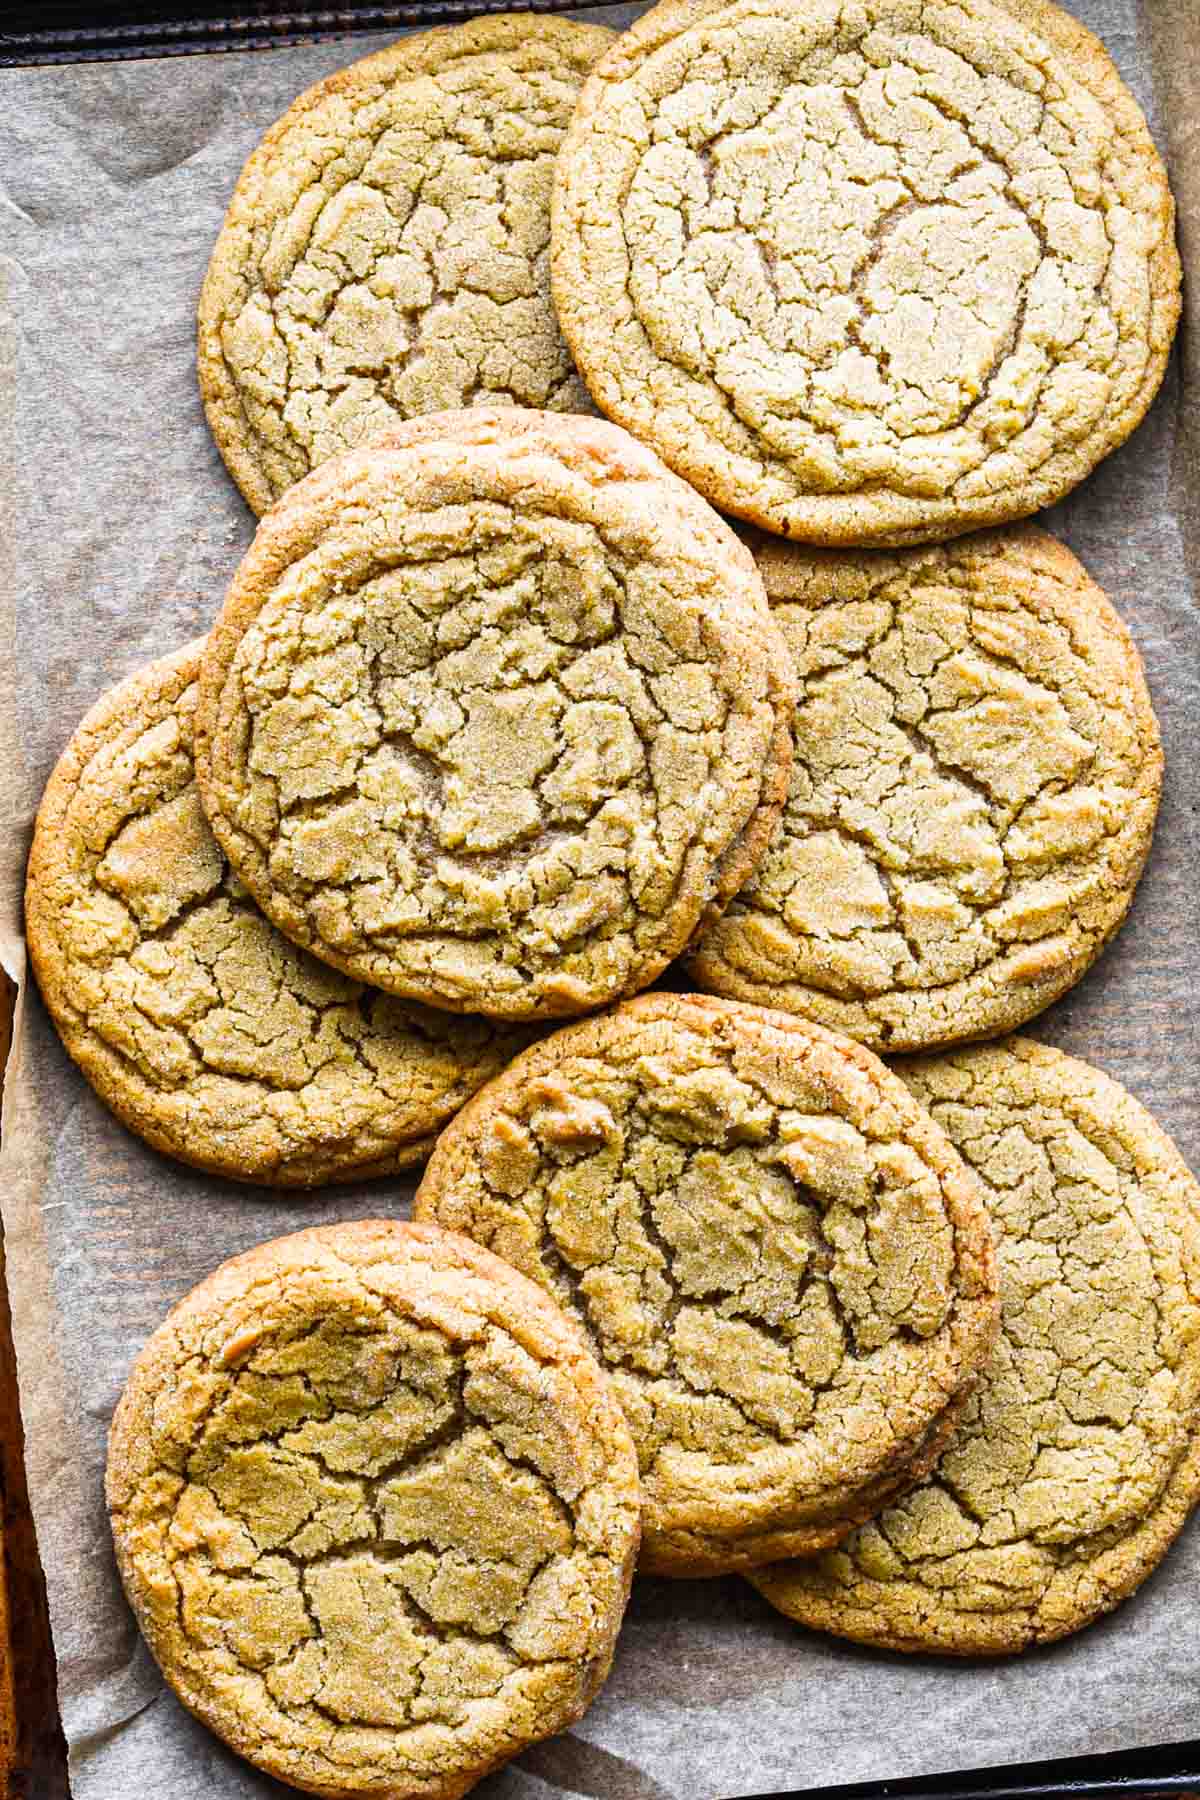 Baked ginger cookies without molasses on a cookie sheet.